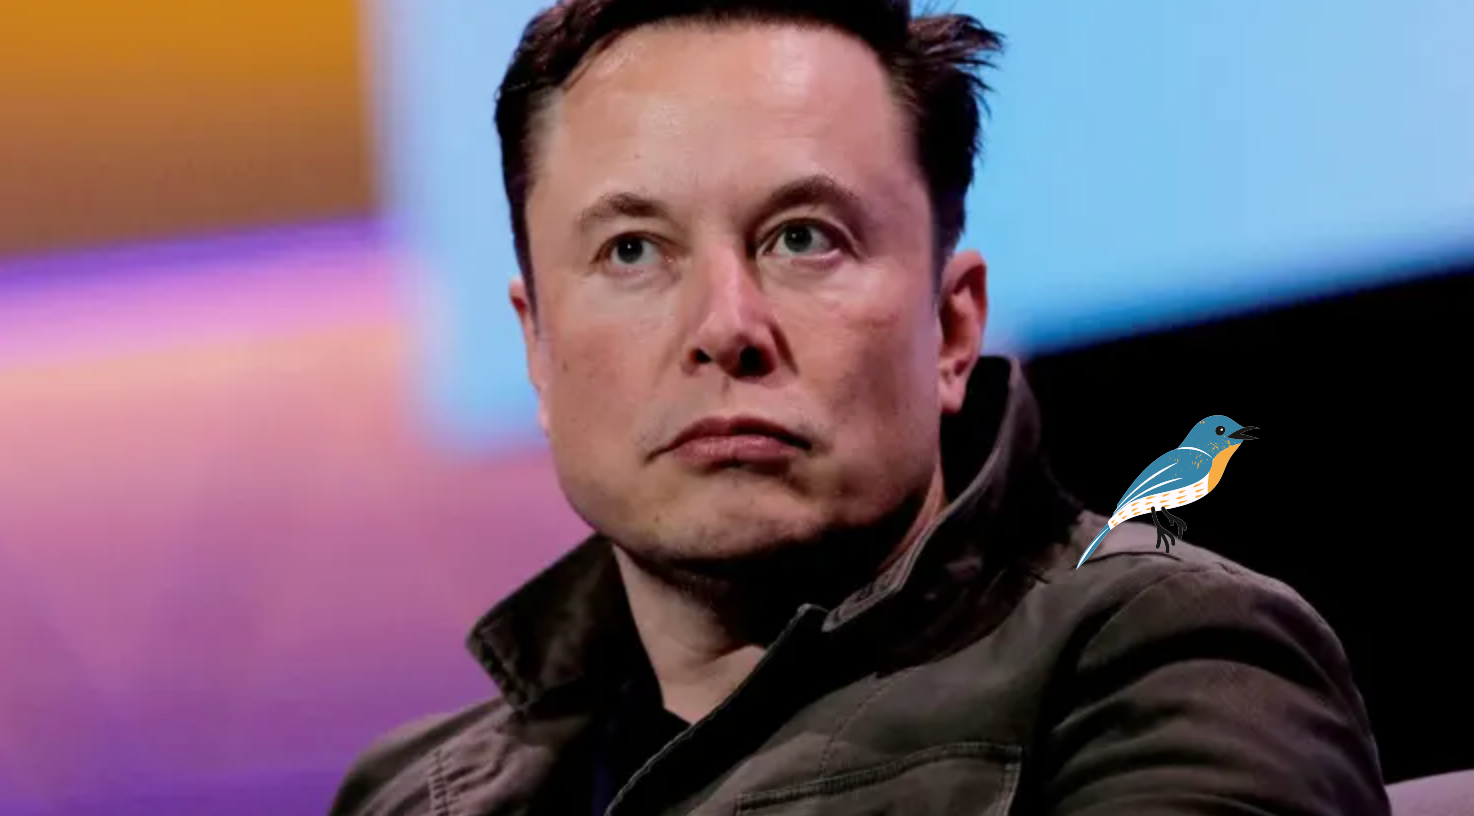 Elon Musk and the Canary in the coalmine: A message to startups in 2023